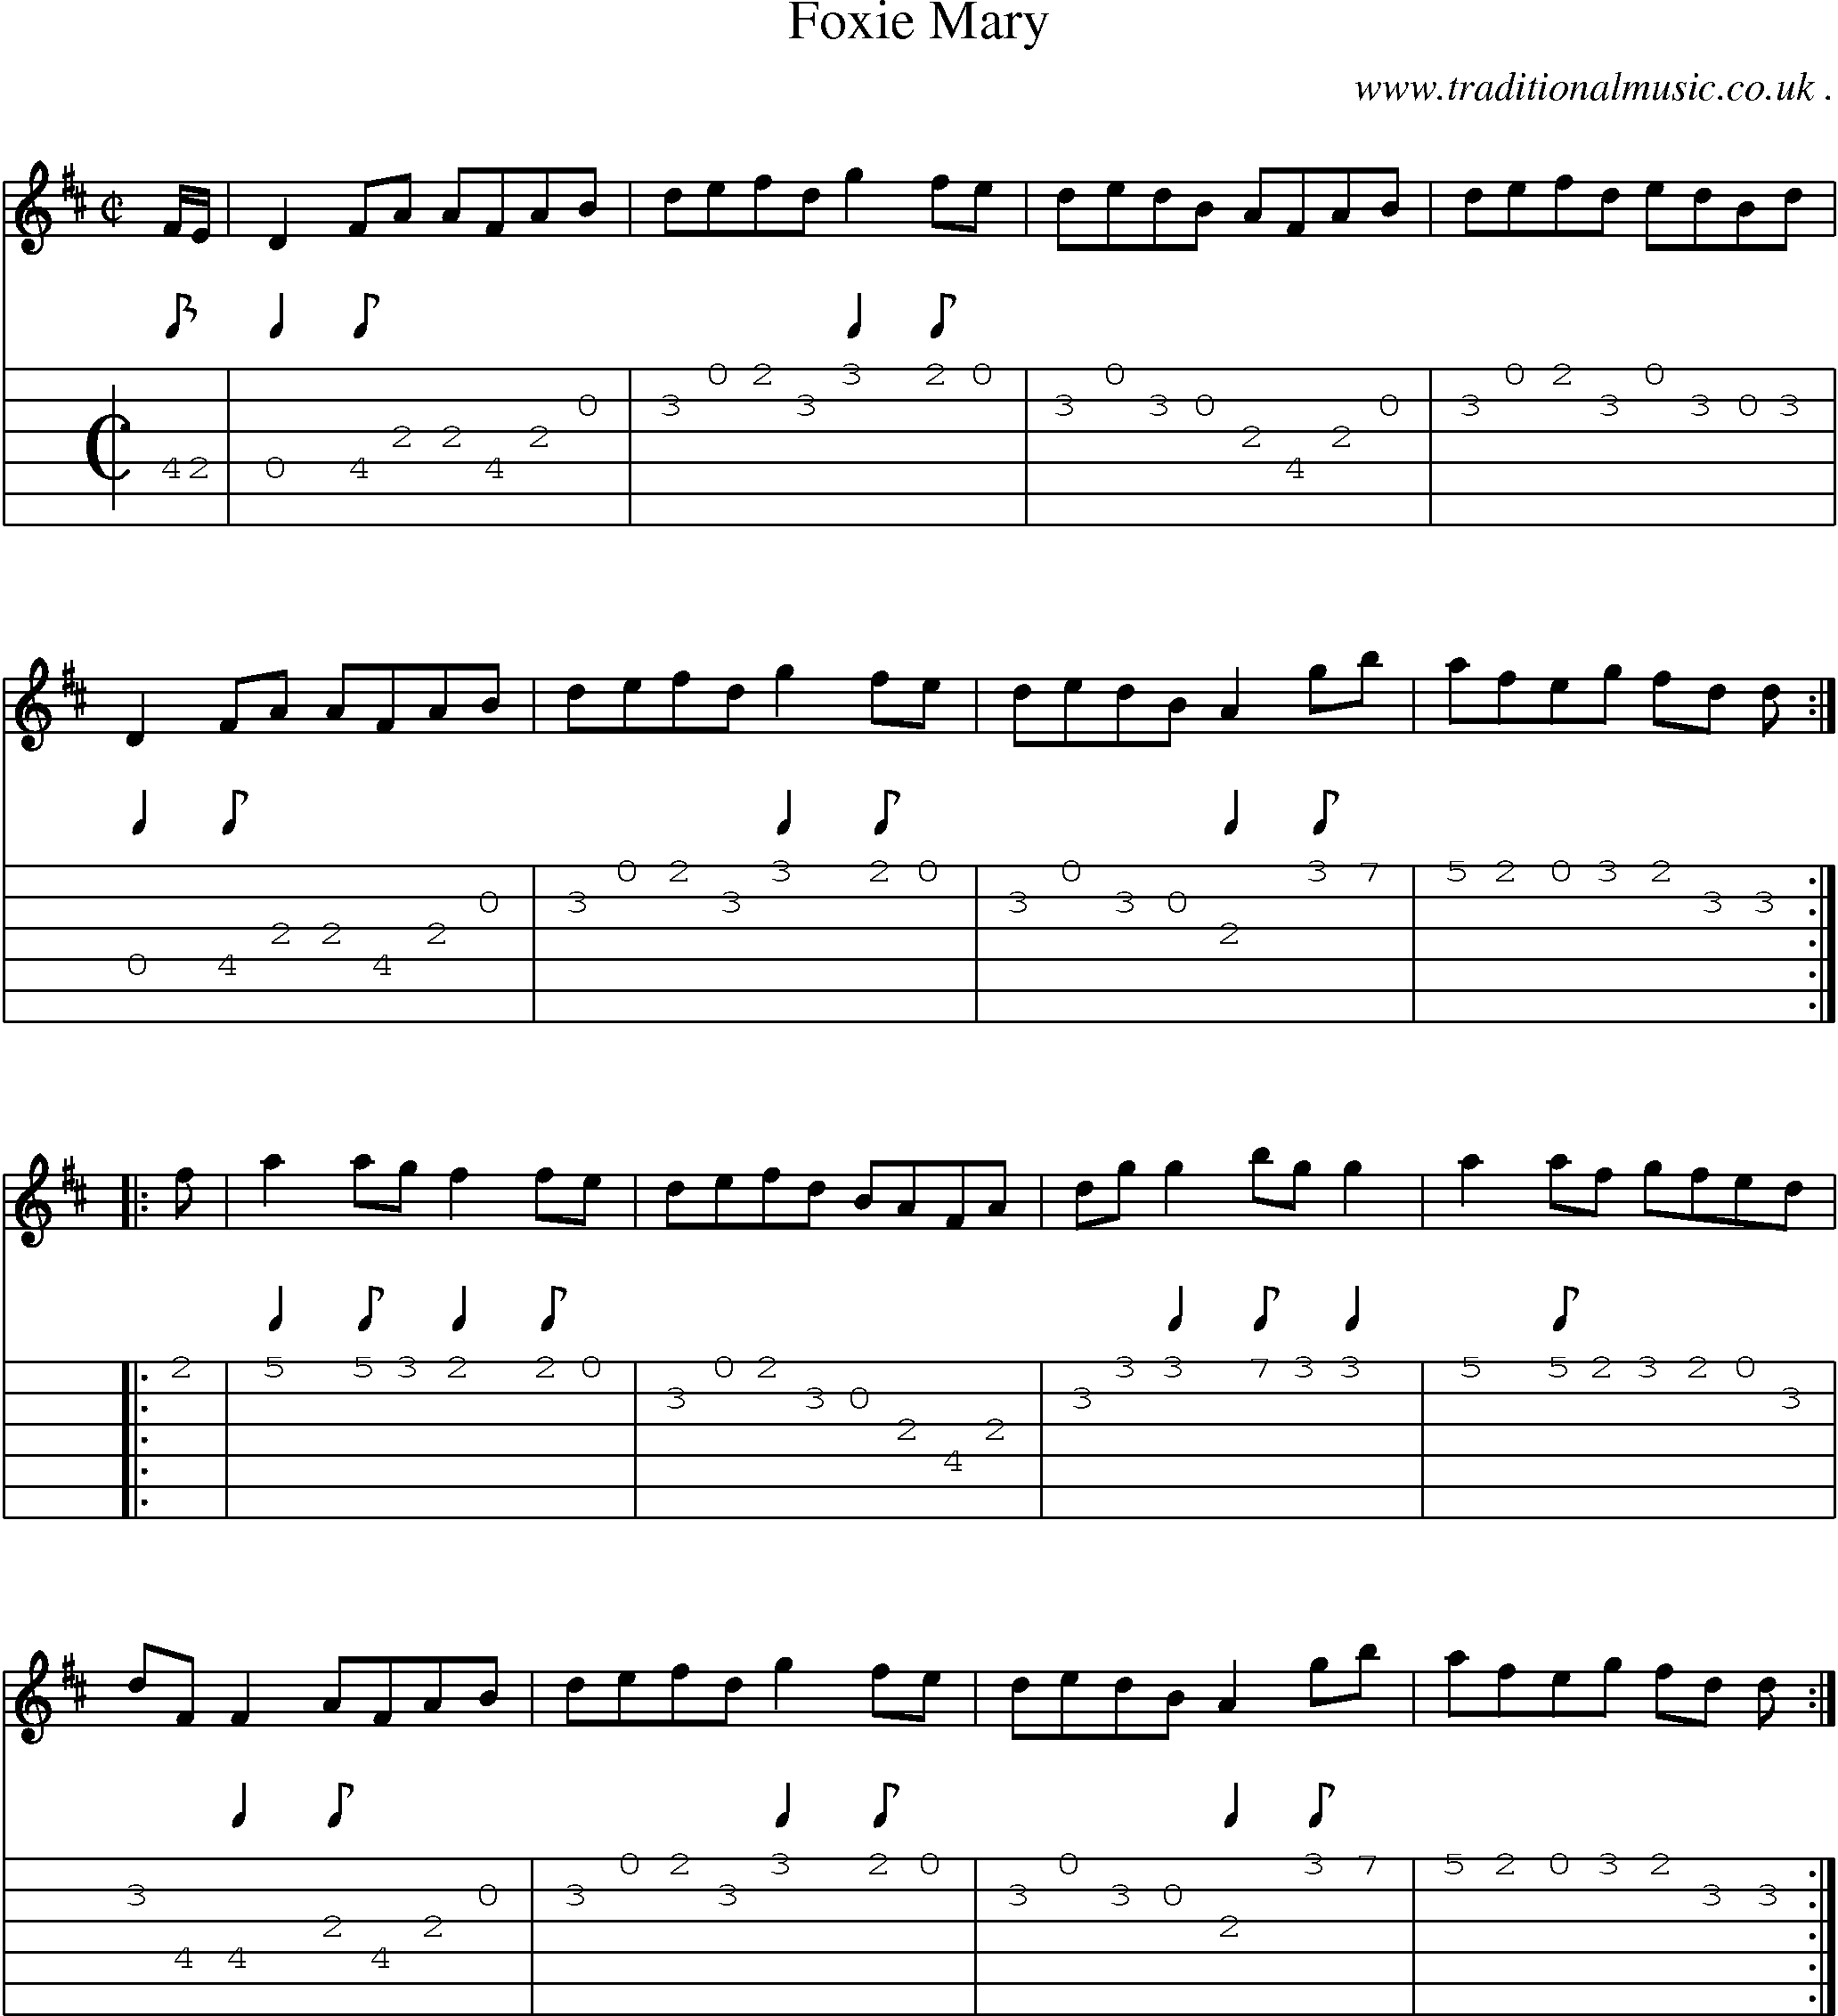 Sheet-Music and Guitar Tabs for Foxie Mary